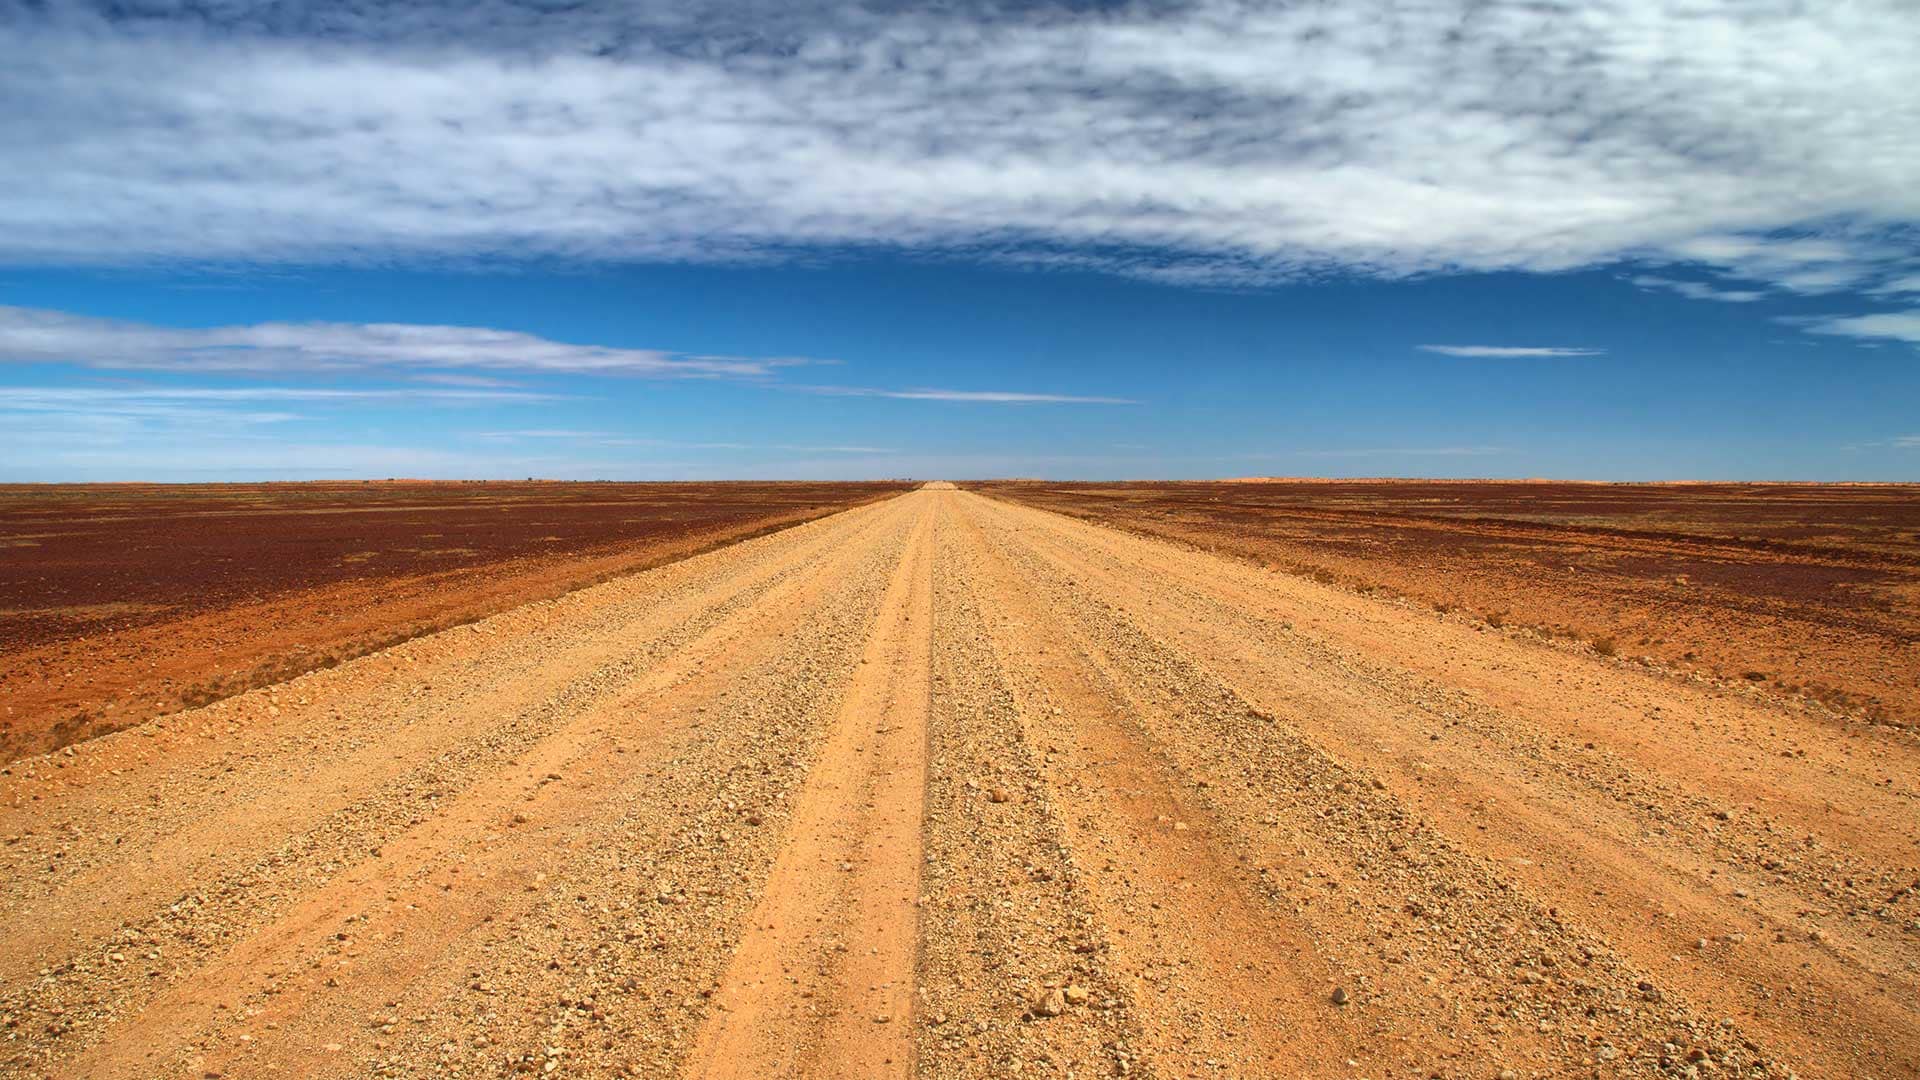 View of the Birdsville track into the distance, from ground level